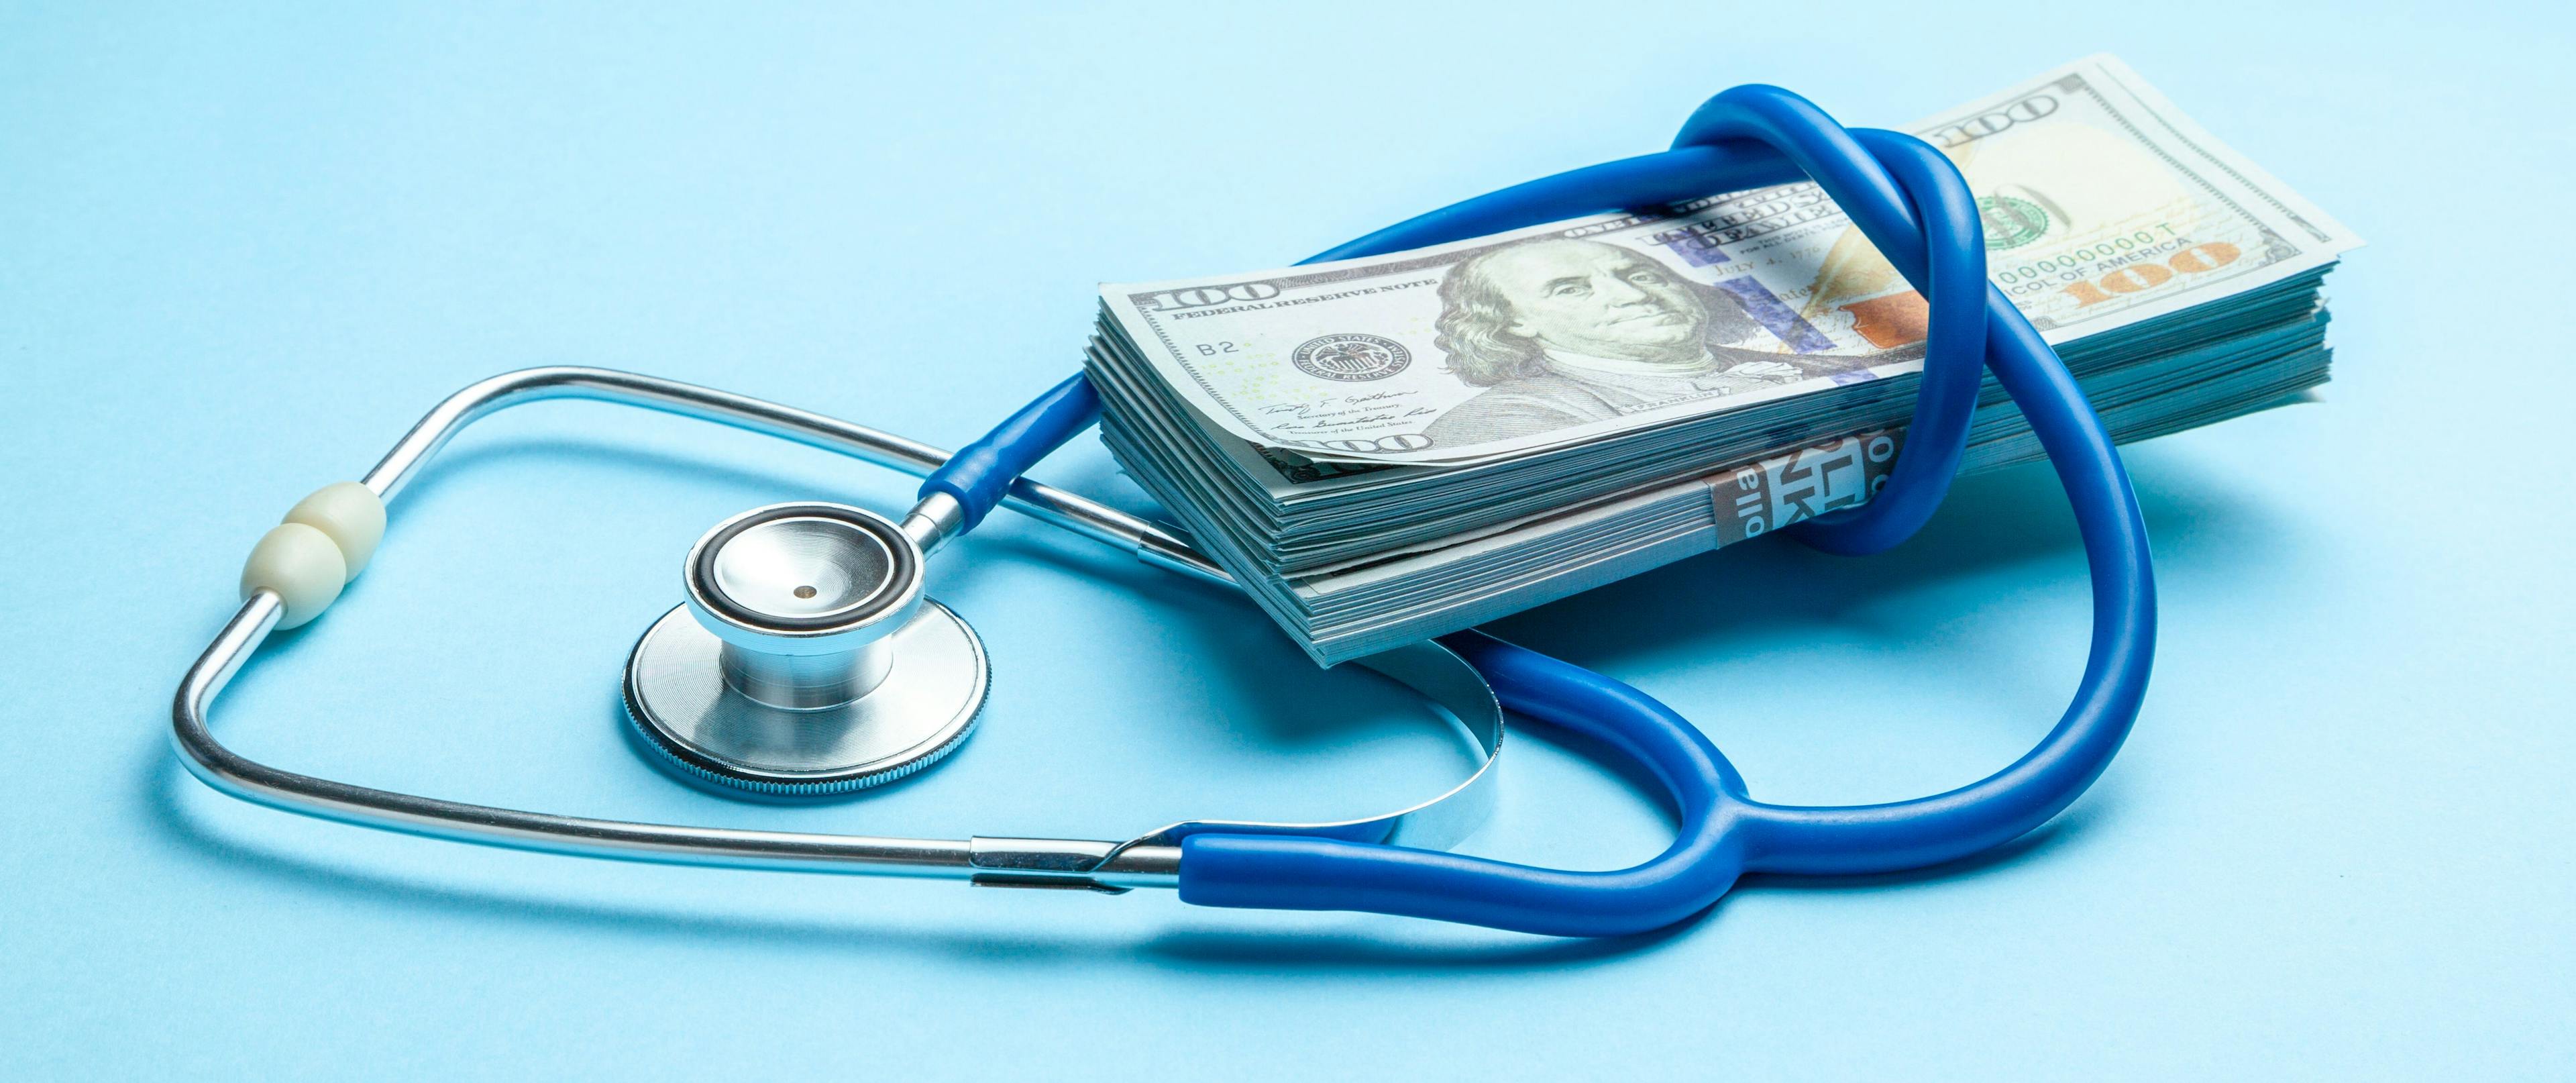 Stack of cash dollars and stethoscope on blue background. The concept of medical strechevka or expensive medicine, doctors salary | Image Credit: © adragan - stock.adobe.com 